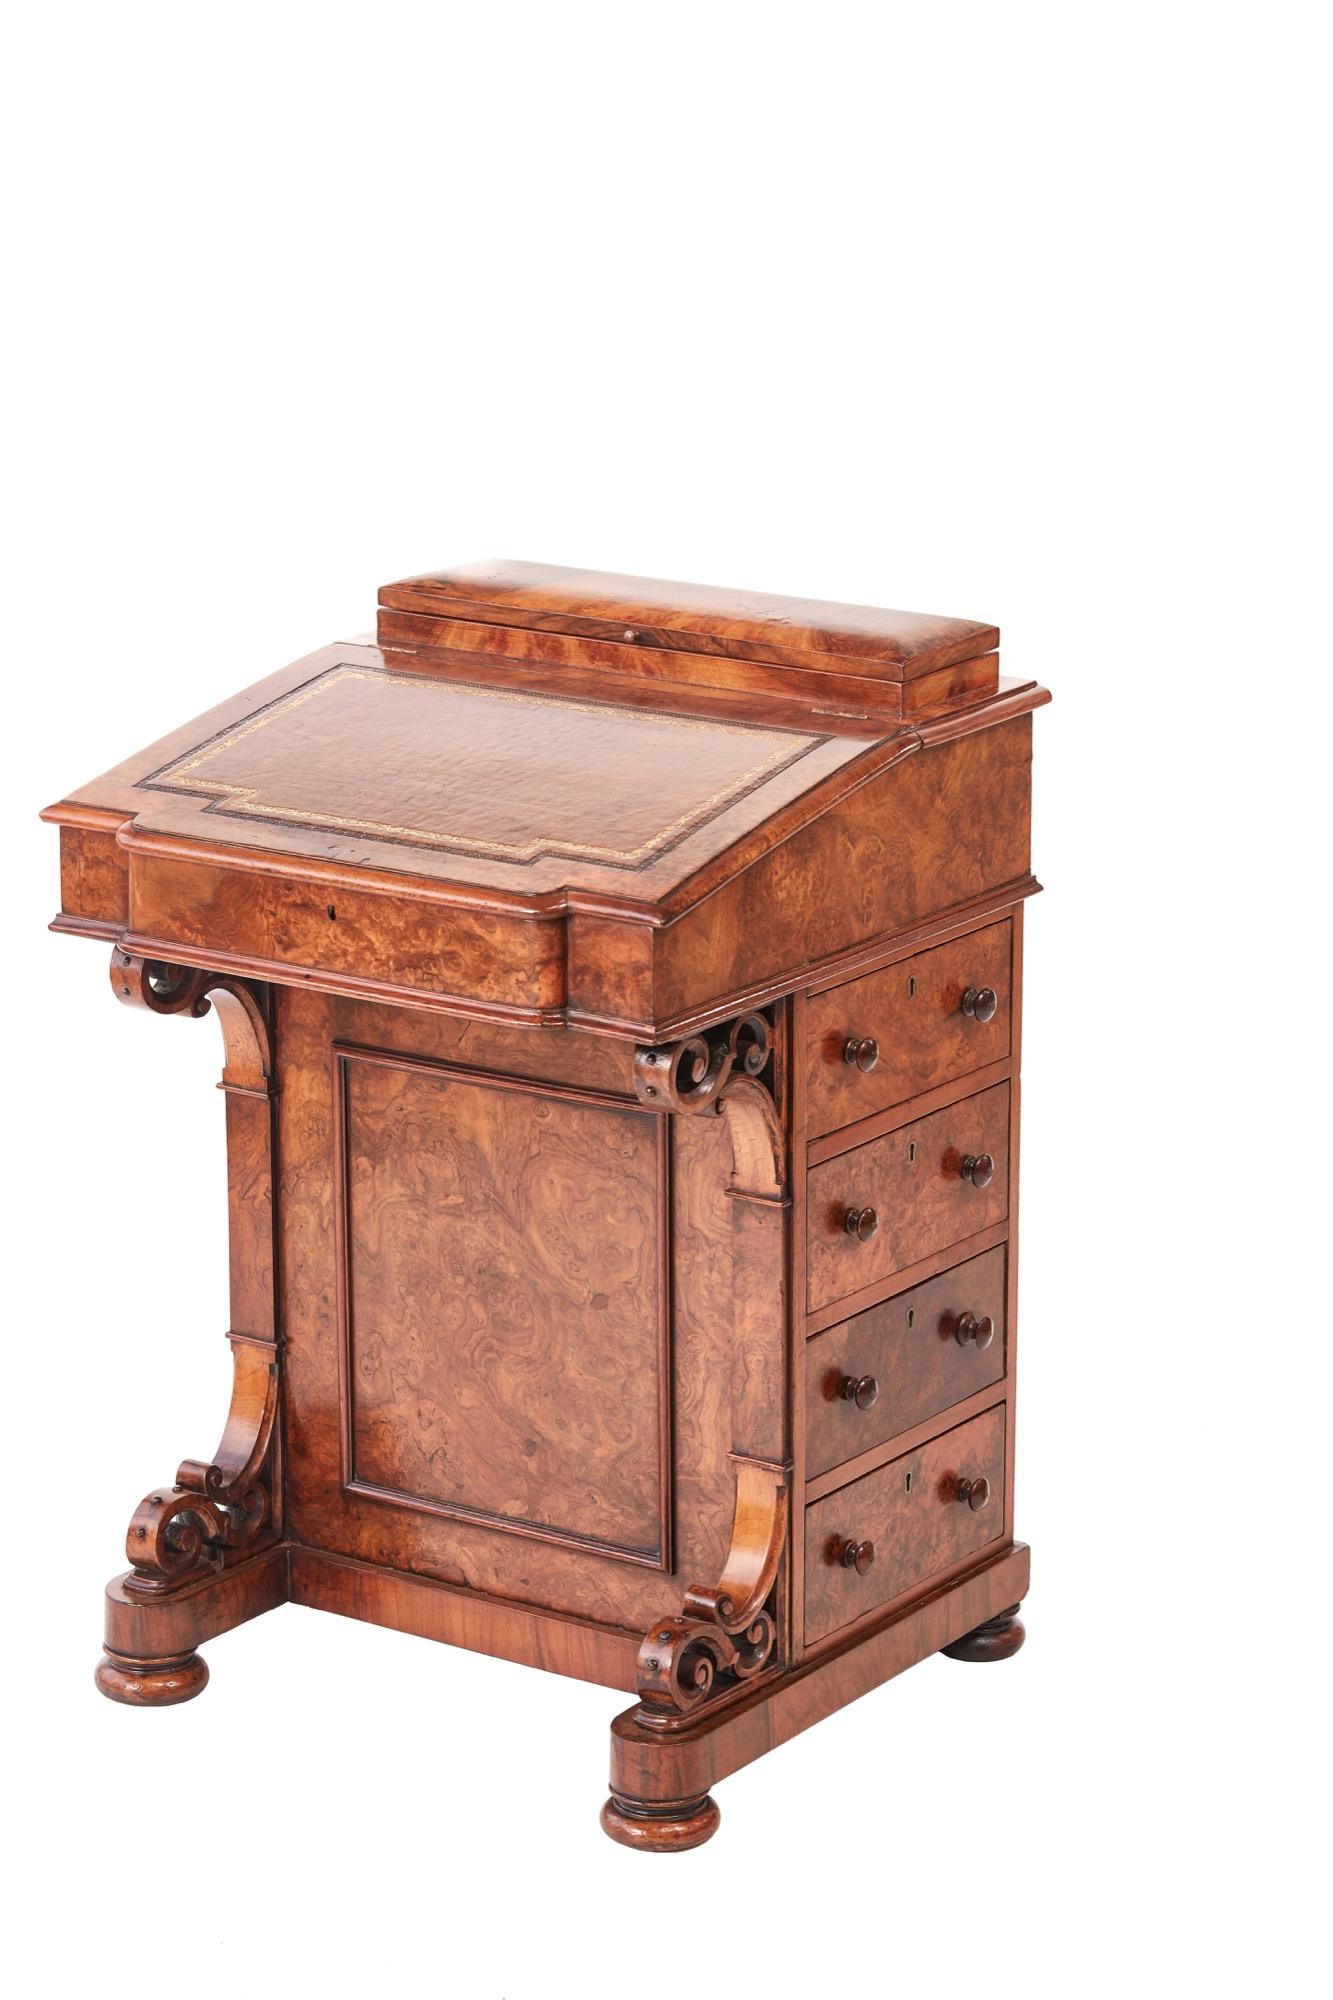 Quality Victorian burr walnut freestanding Davenport, lift up shaped lid with a fitted interior, carved shaped supports to the front, the right side has four drawers with original knobs, the left side has four false drawers with original knobs,